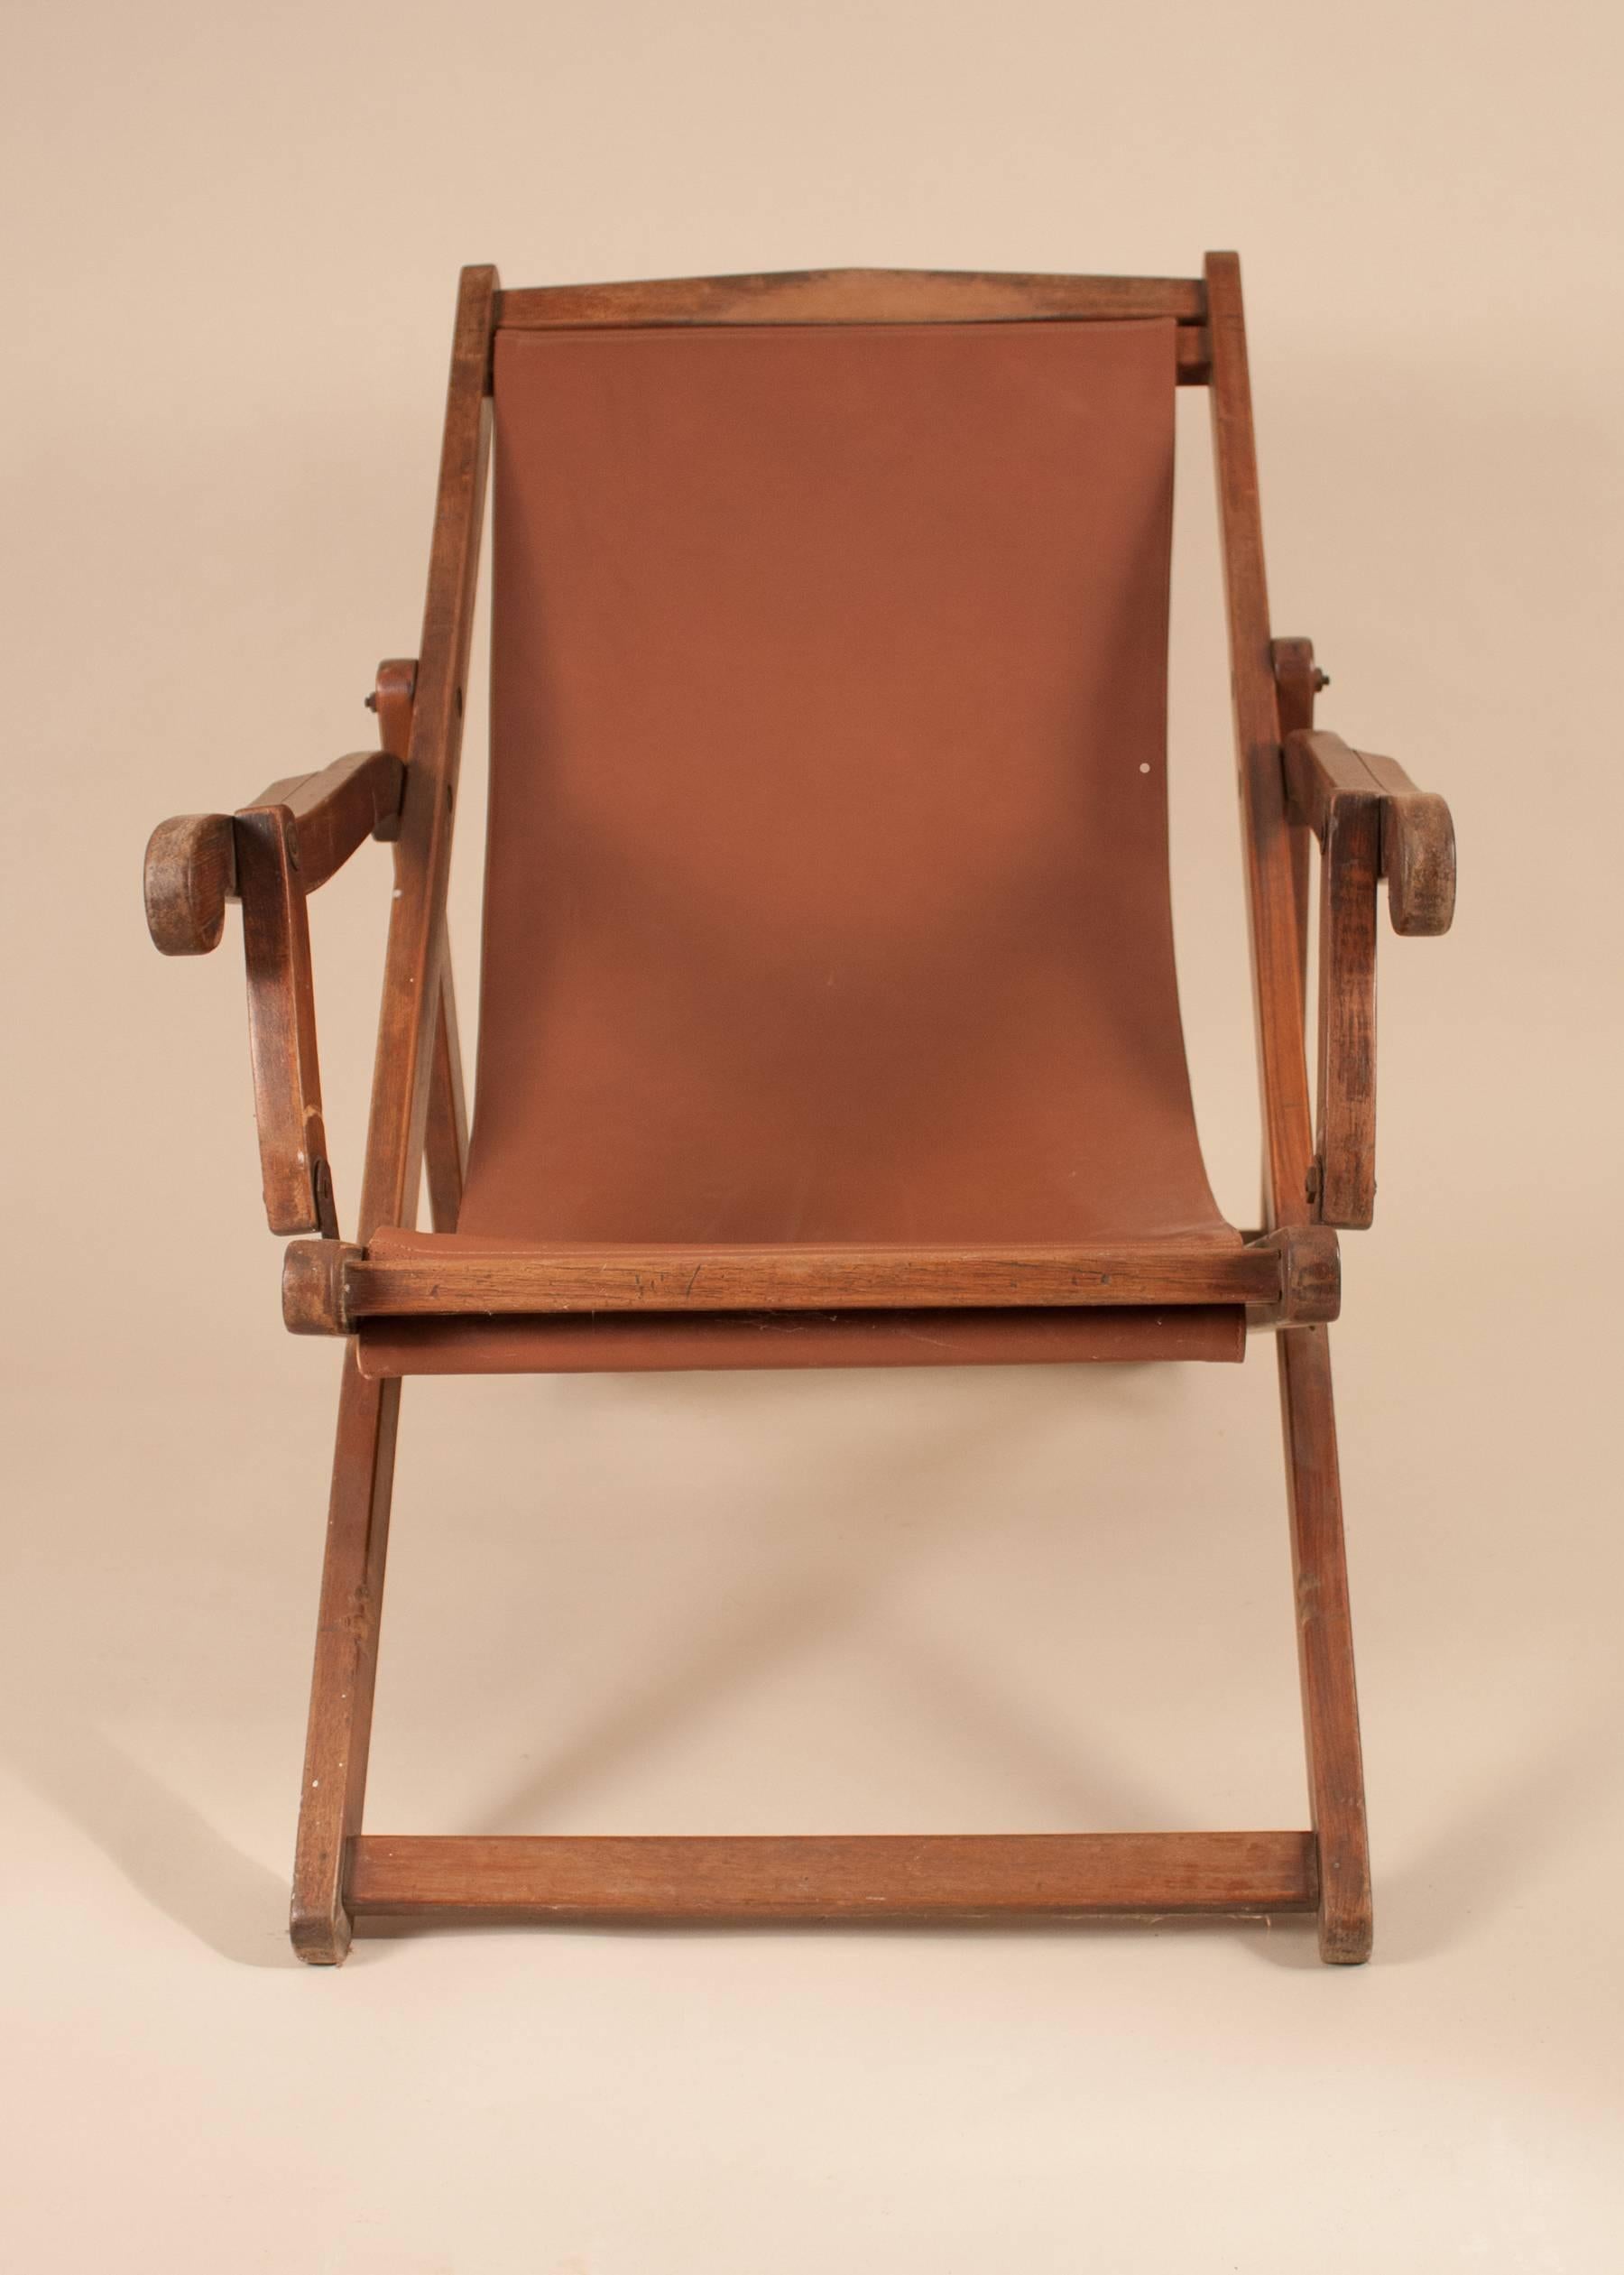 An authentic British Campaign folding, adjustable mahogany sling back chair, circa 1900, with its original wood finish. The plantation lounge chair's canvas sling was replaced some time ago with a chocolate-colored leather.